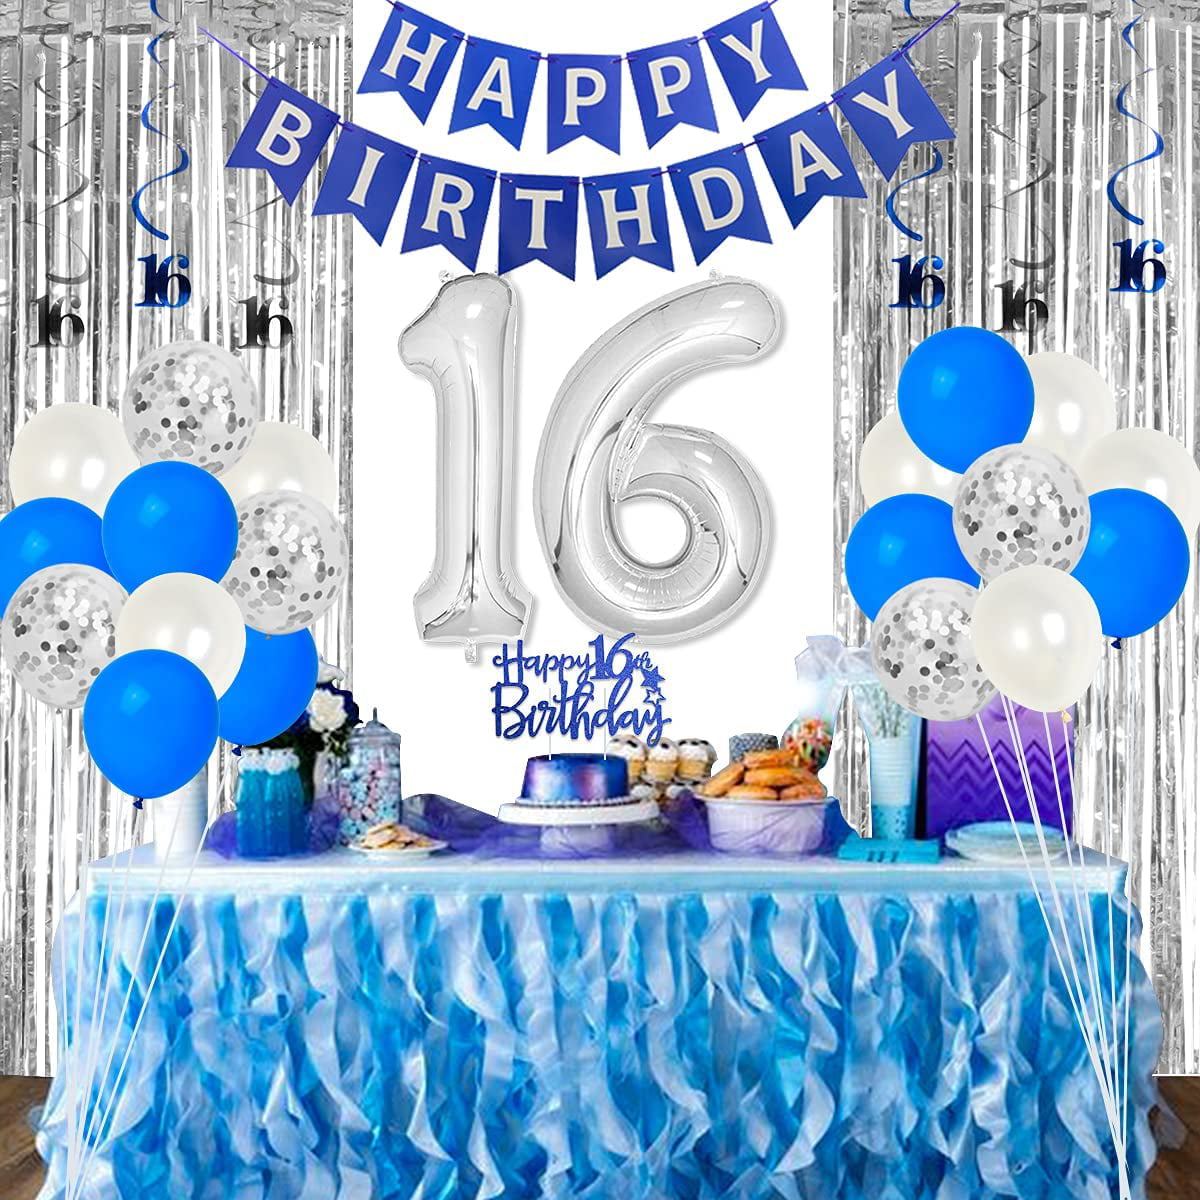 Blue and Silver 16th Birthday Decorations for Boys Girls Sweet Sixteen Birthday Party Supplies Blue Happy Birthday Banner Cake Topper Fringe Curtain Hanging Swirls - Walmart.com